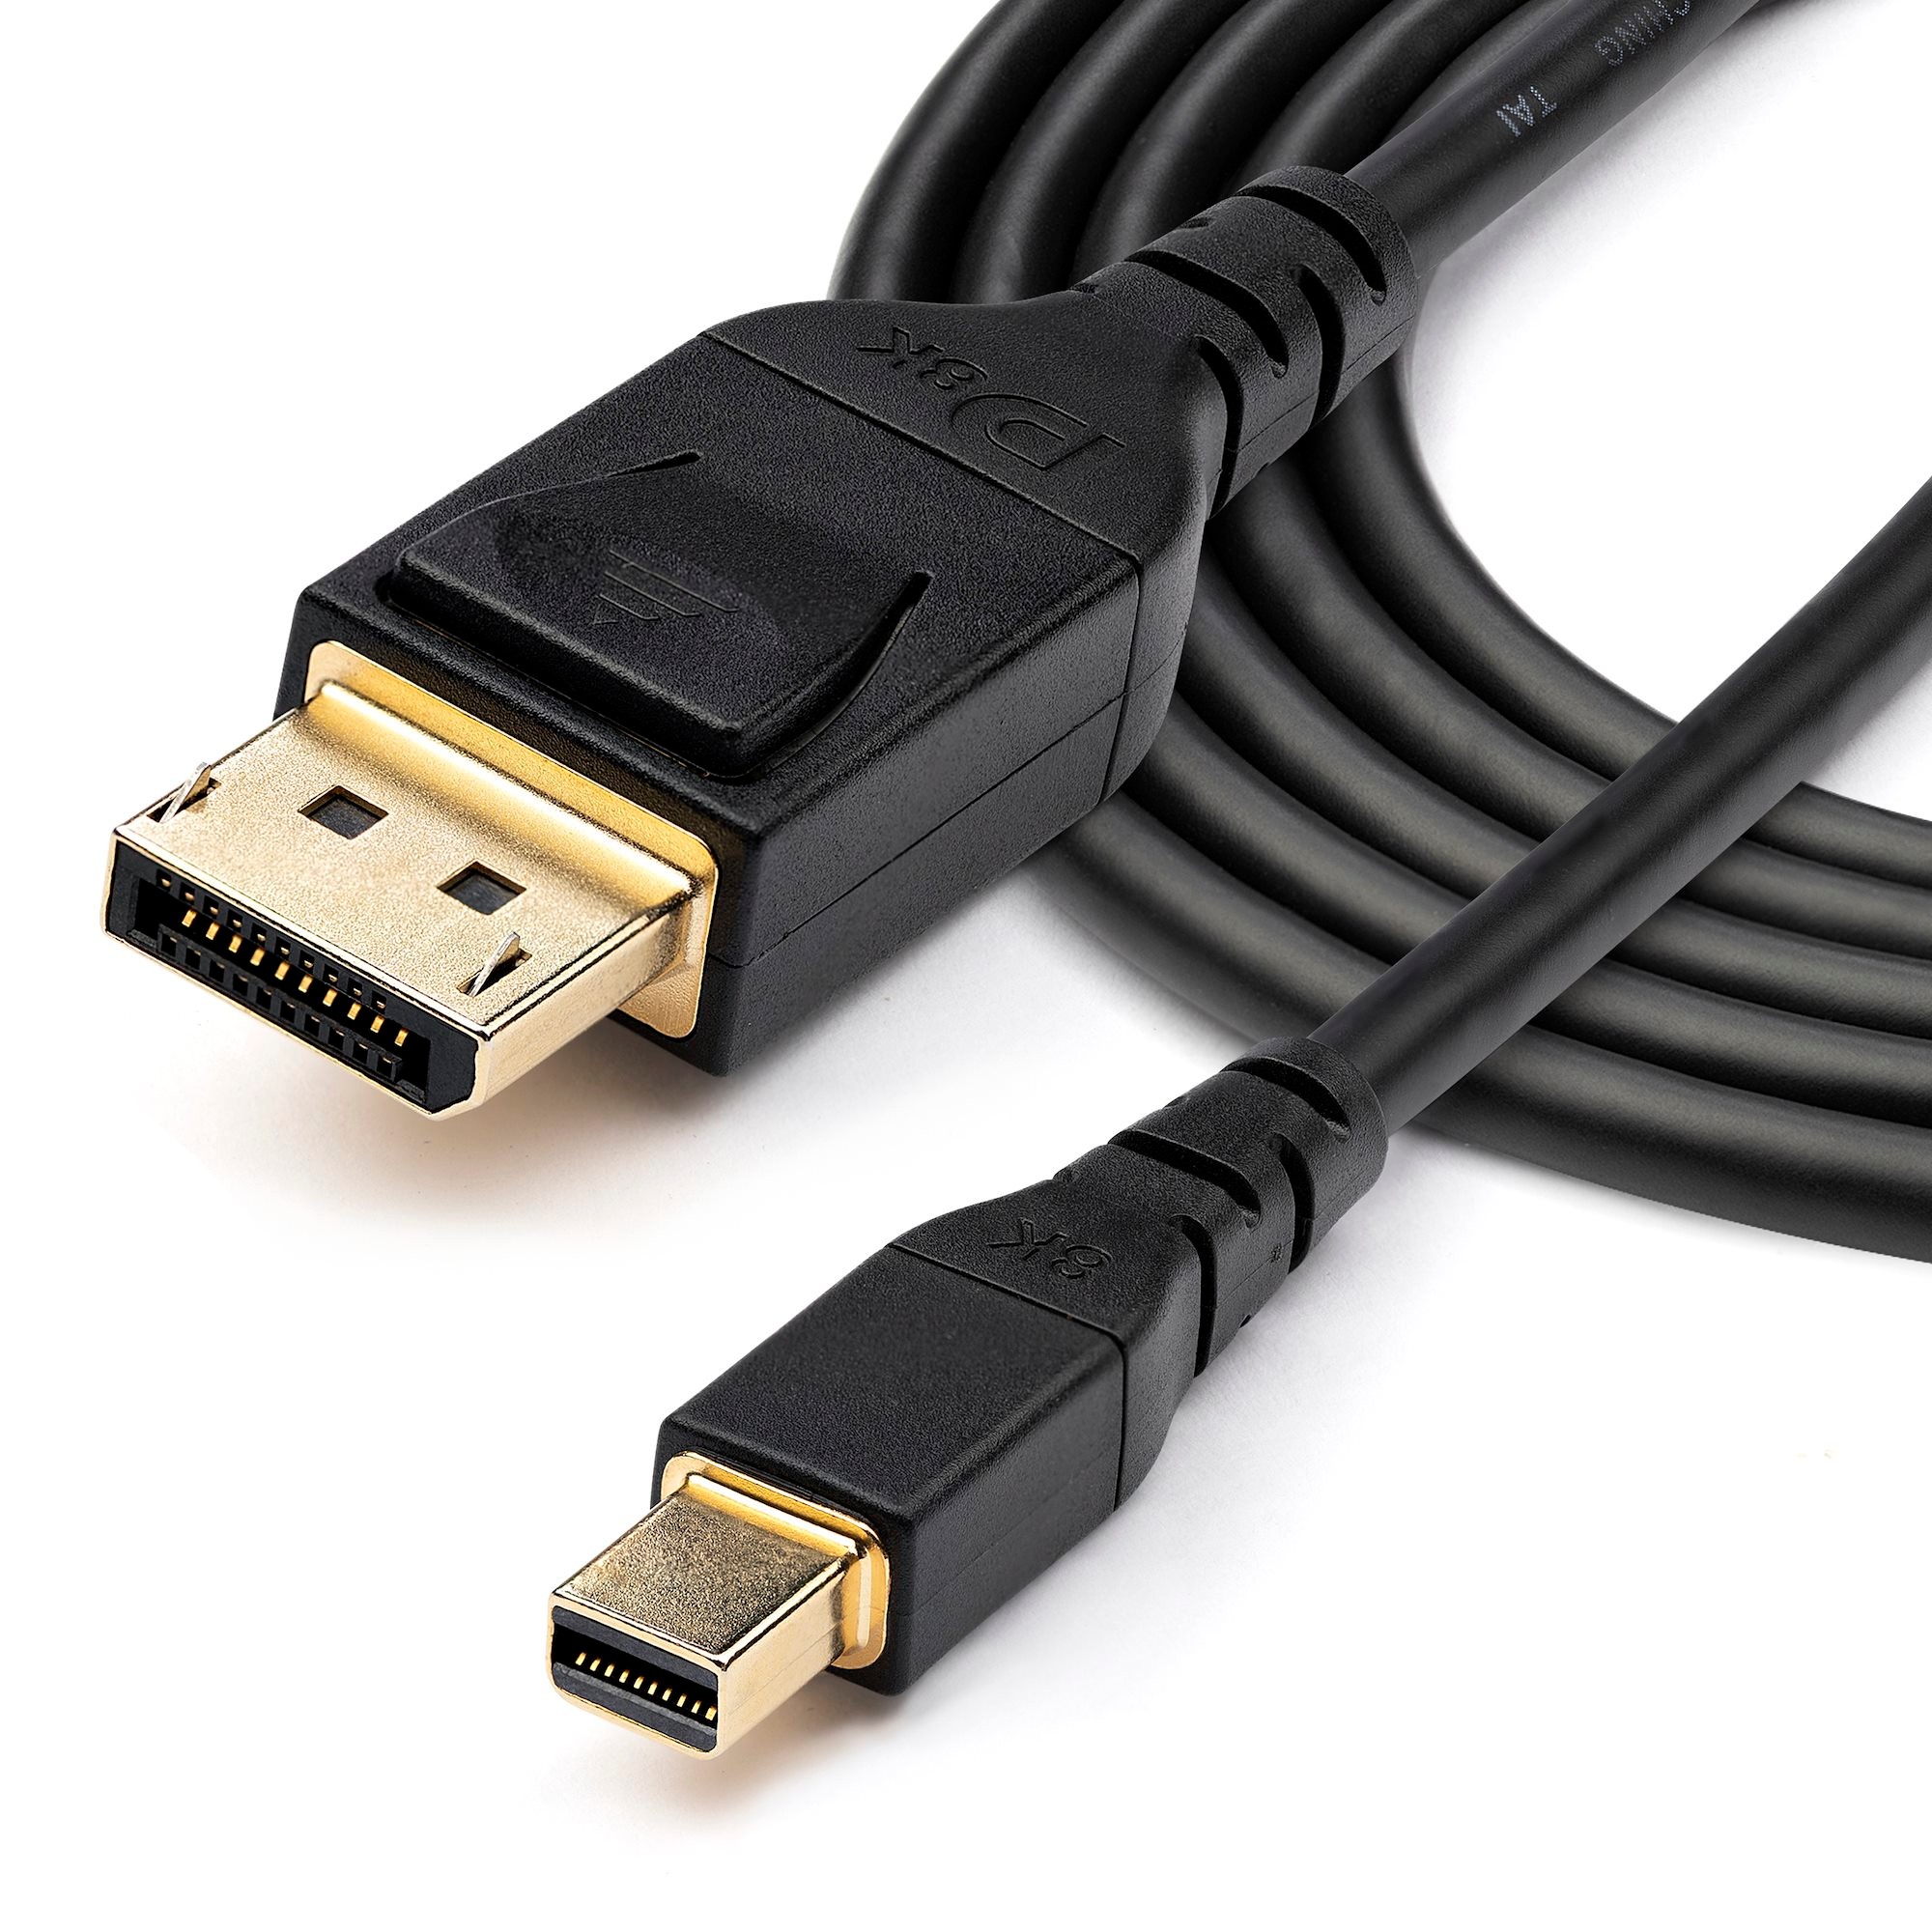 6ft (2m) Mini DisplayPort to HDMI Cable - 4K 30Hz Video - mDP to HDMI  Adapter Cable - Mini DP or Thunderbolt 1/2 Mac/PC to HDMI Monitor/Display -  mDP